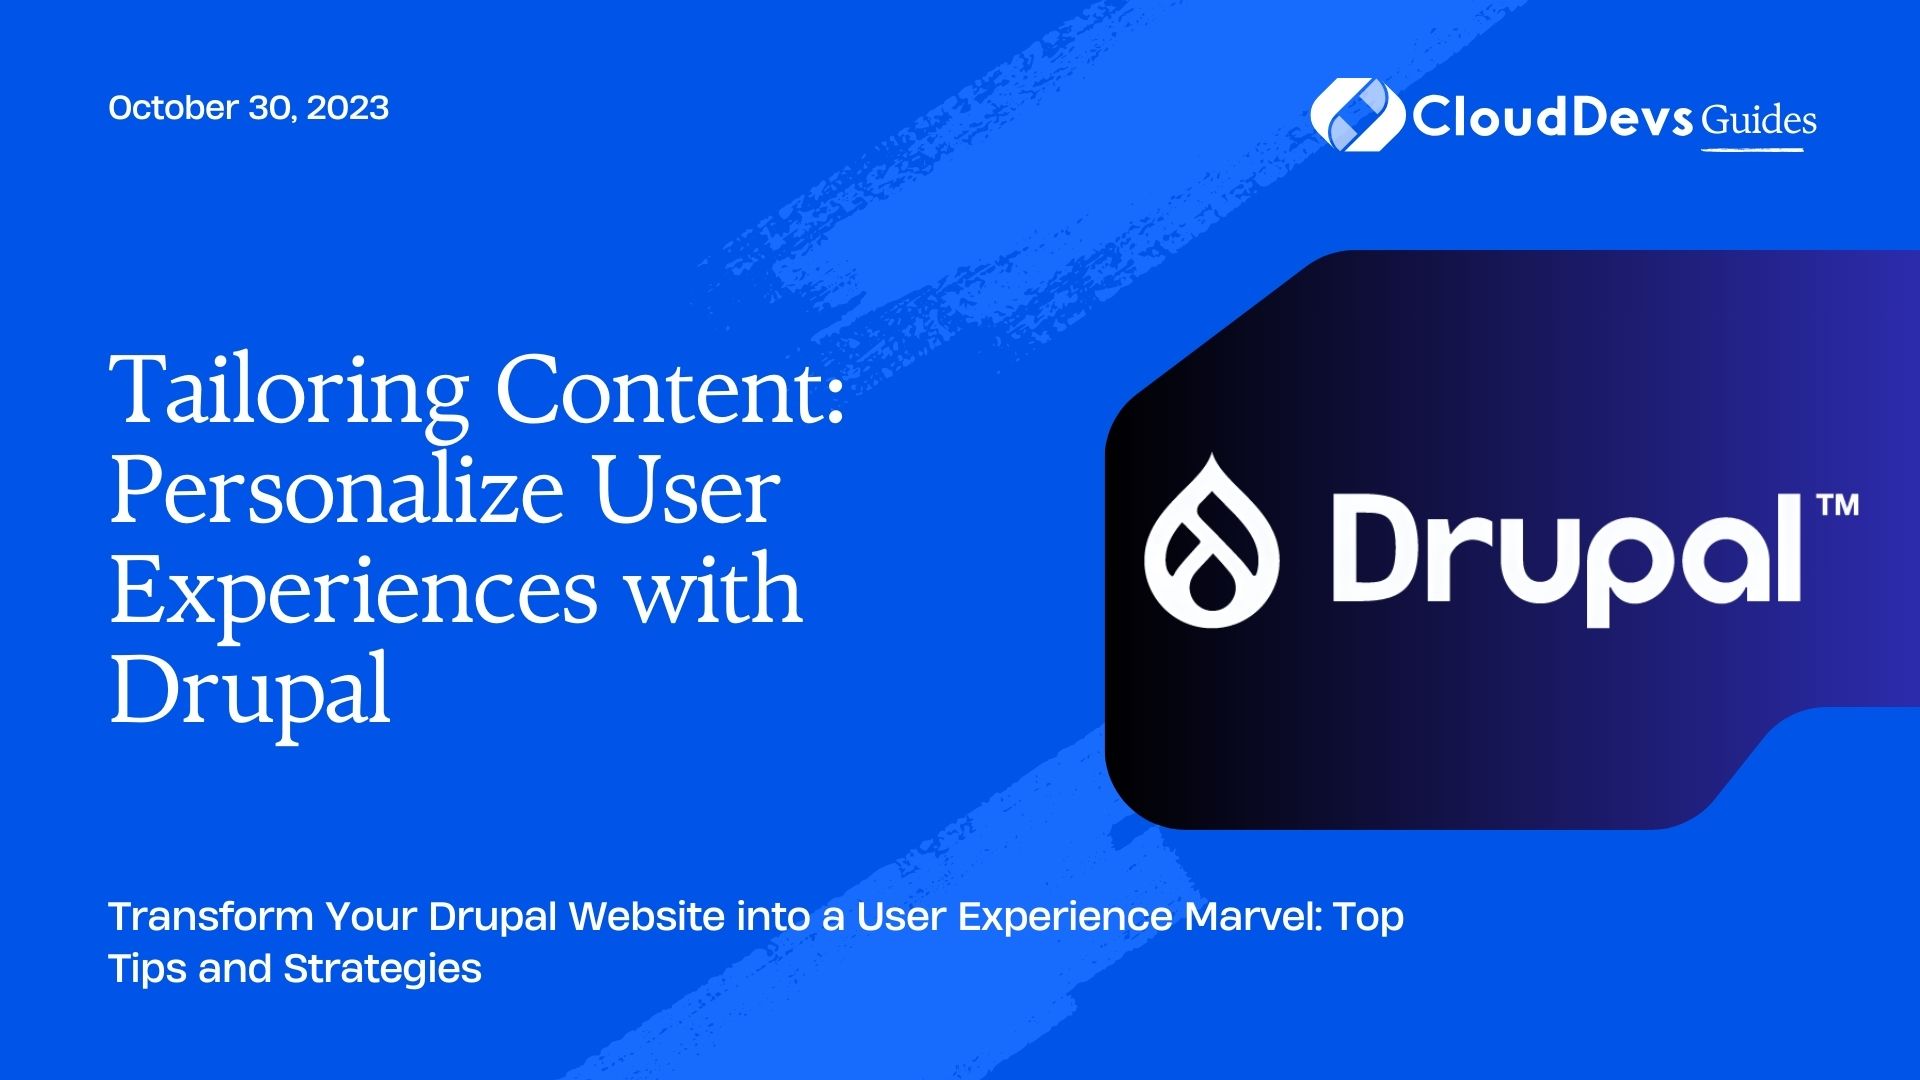 Tailoring Content: Personalize User Experiences with Drupal